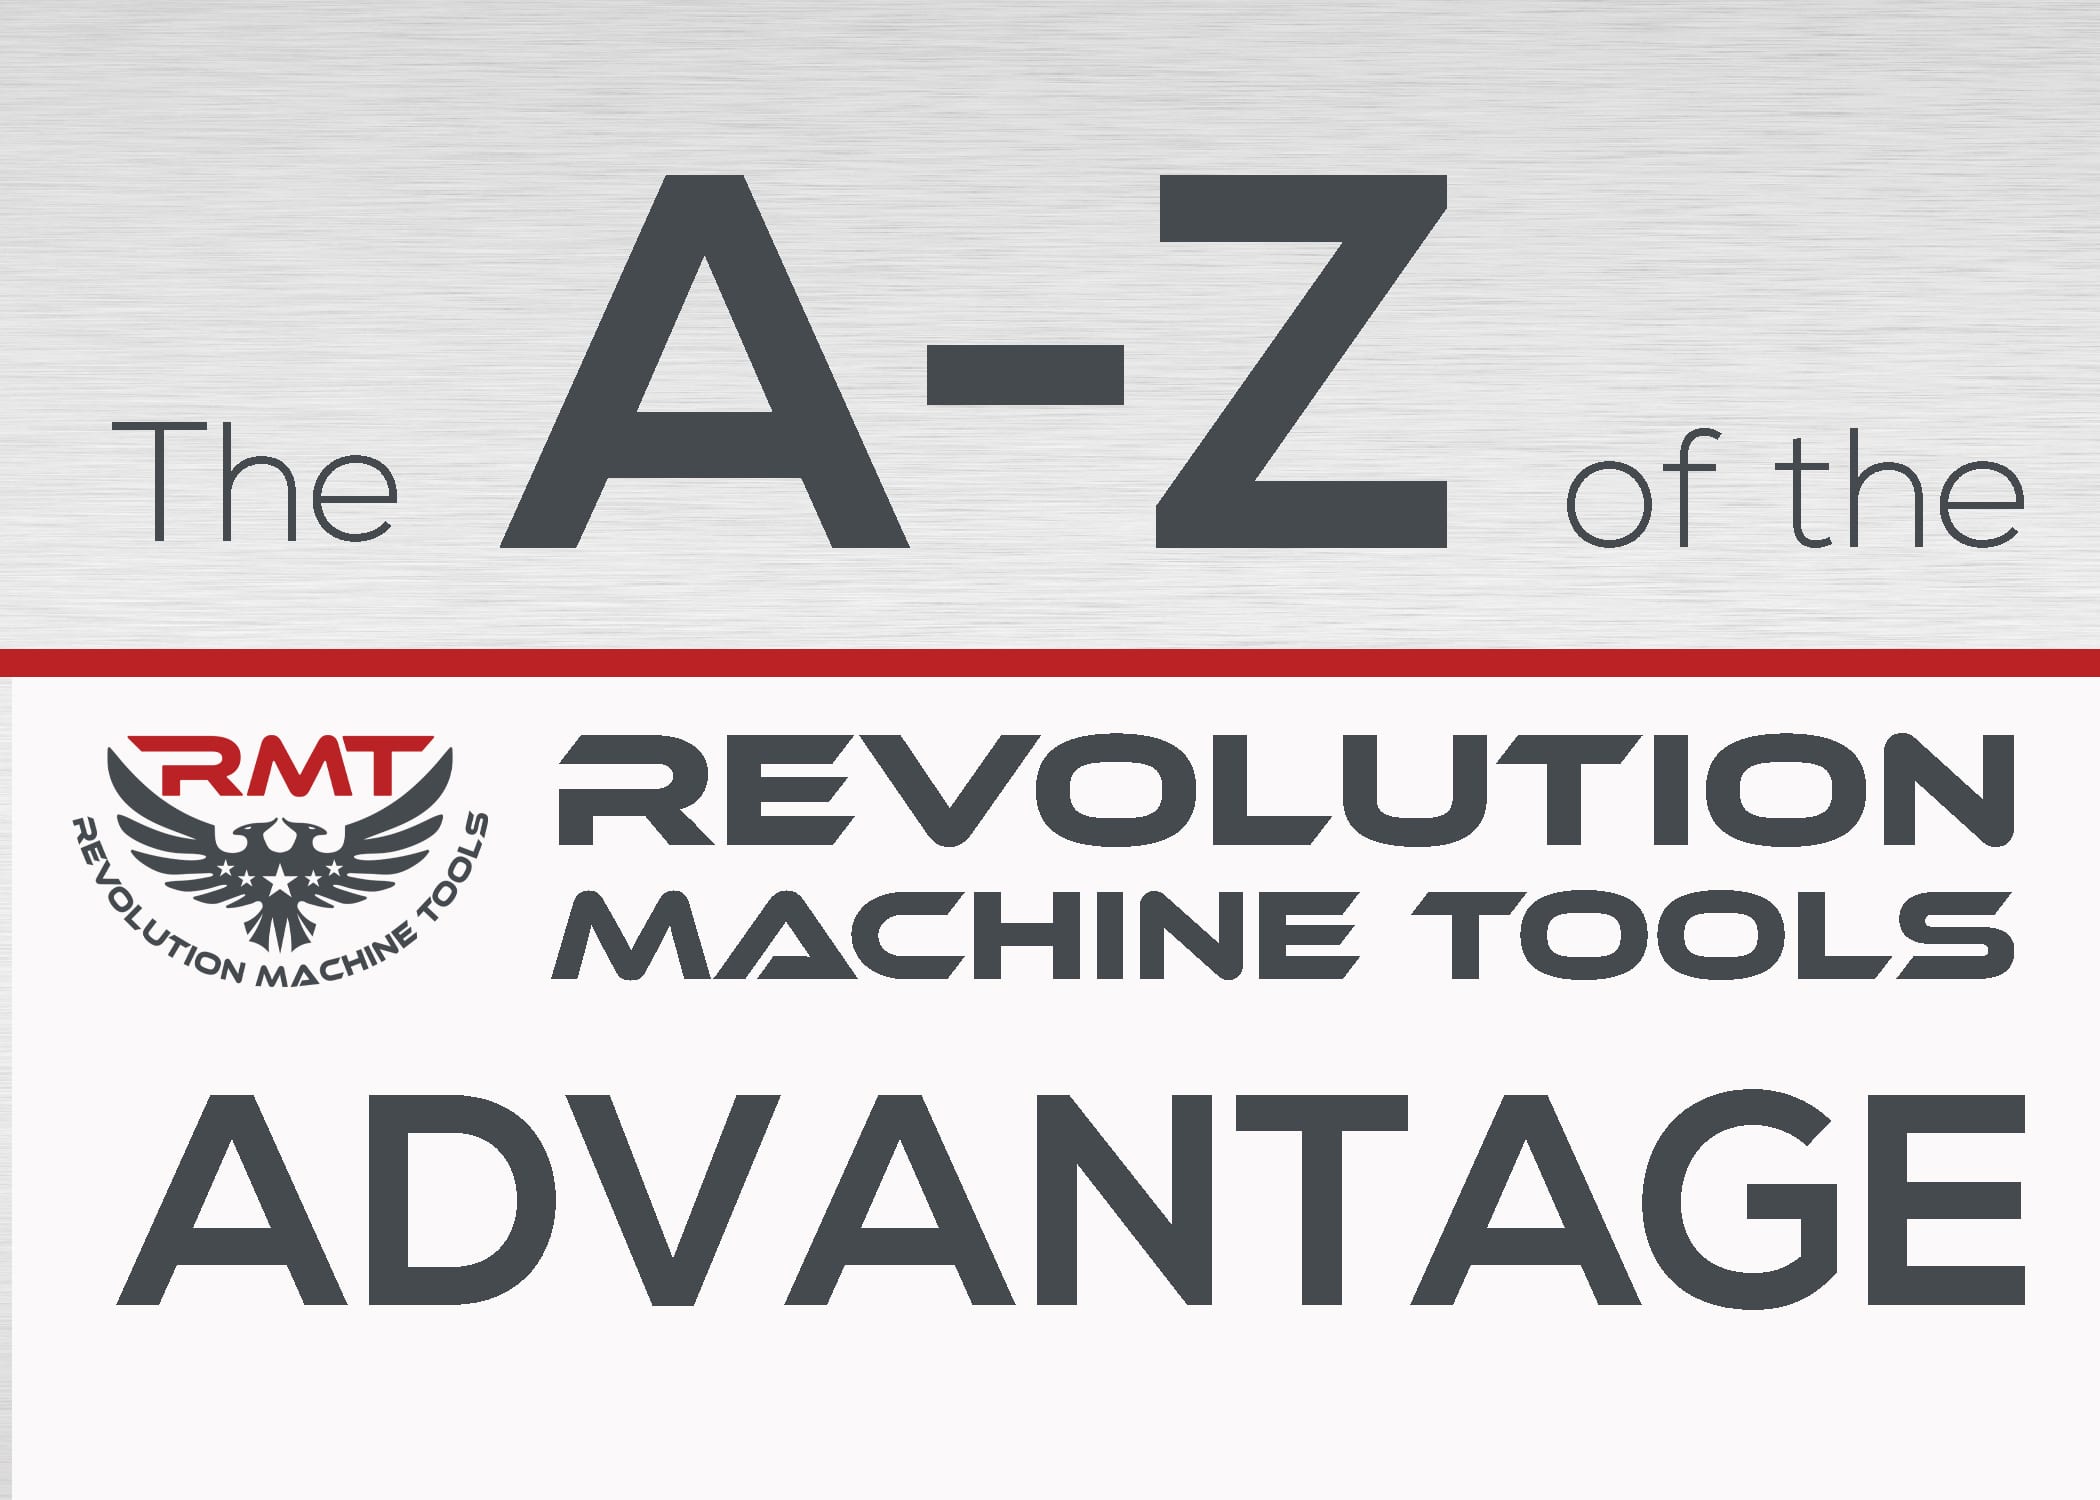 The A-to-Z of the Revolution Machine Tools Advantage